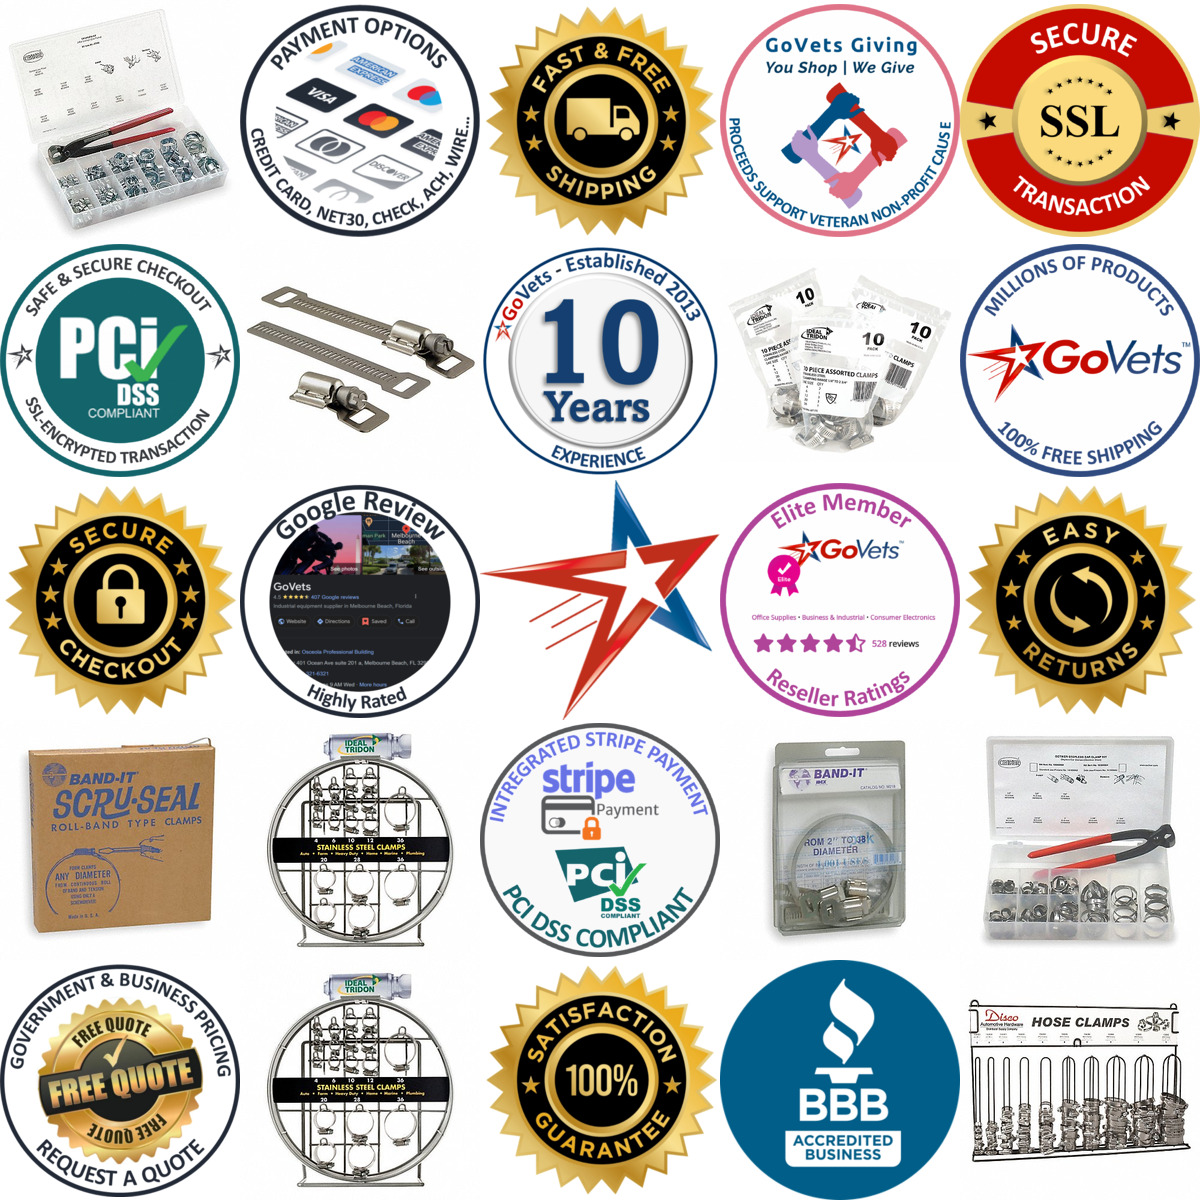 A selection of Hose Clamp Assortments products on GoVets